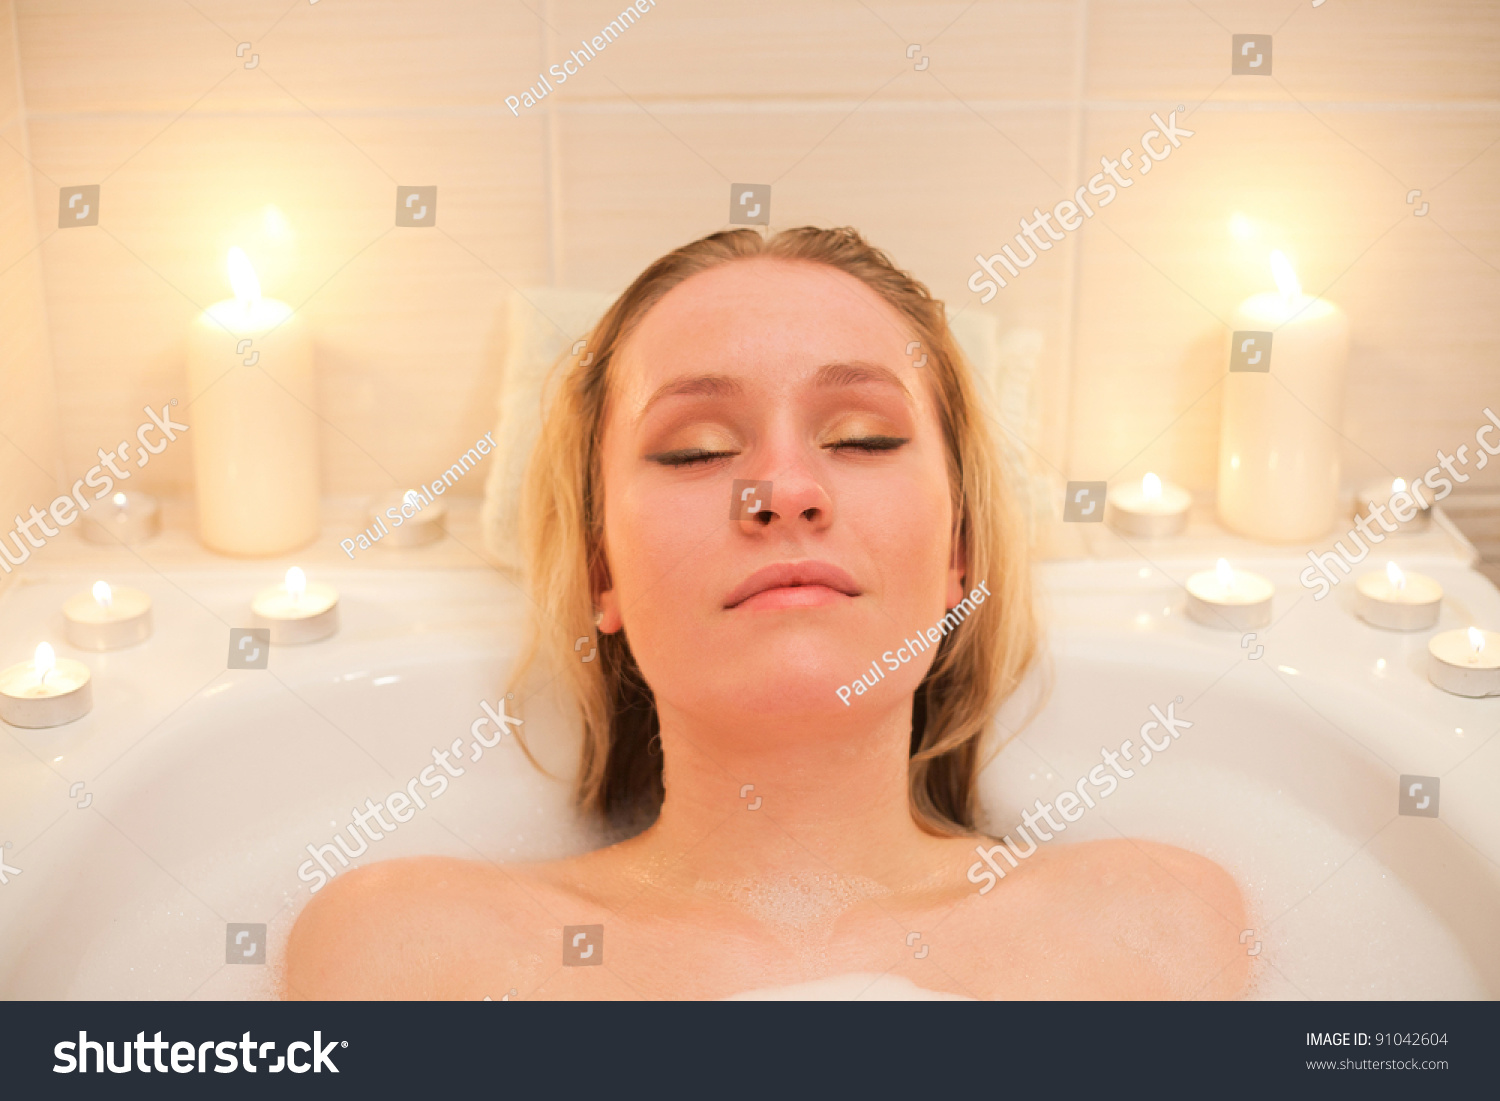 Attractive Young Blond Woman Lying In Bubble Bath With Candles